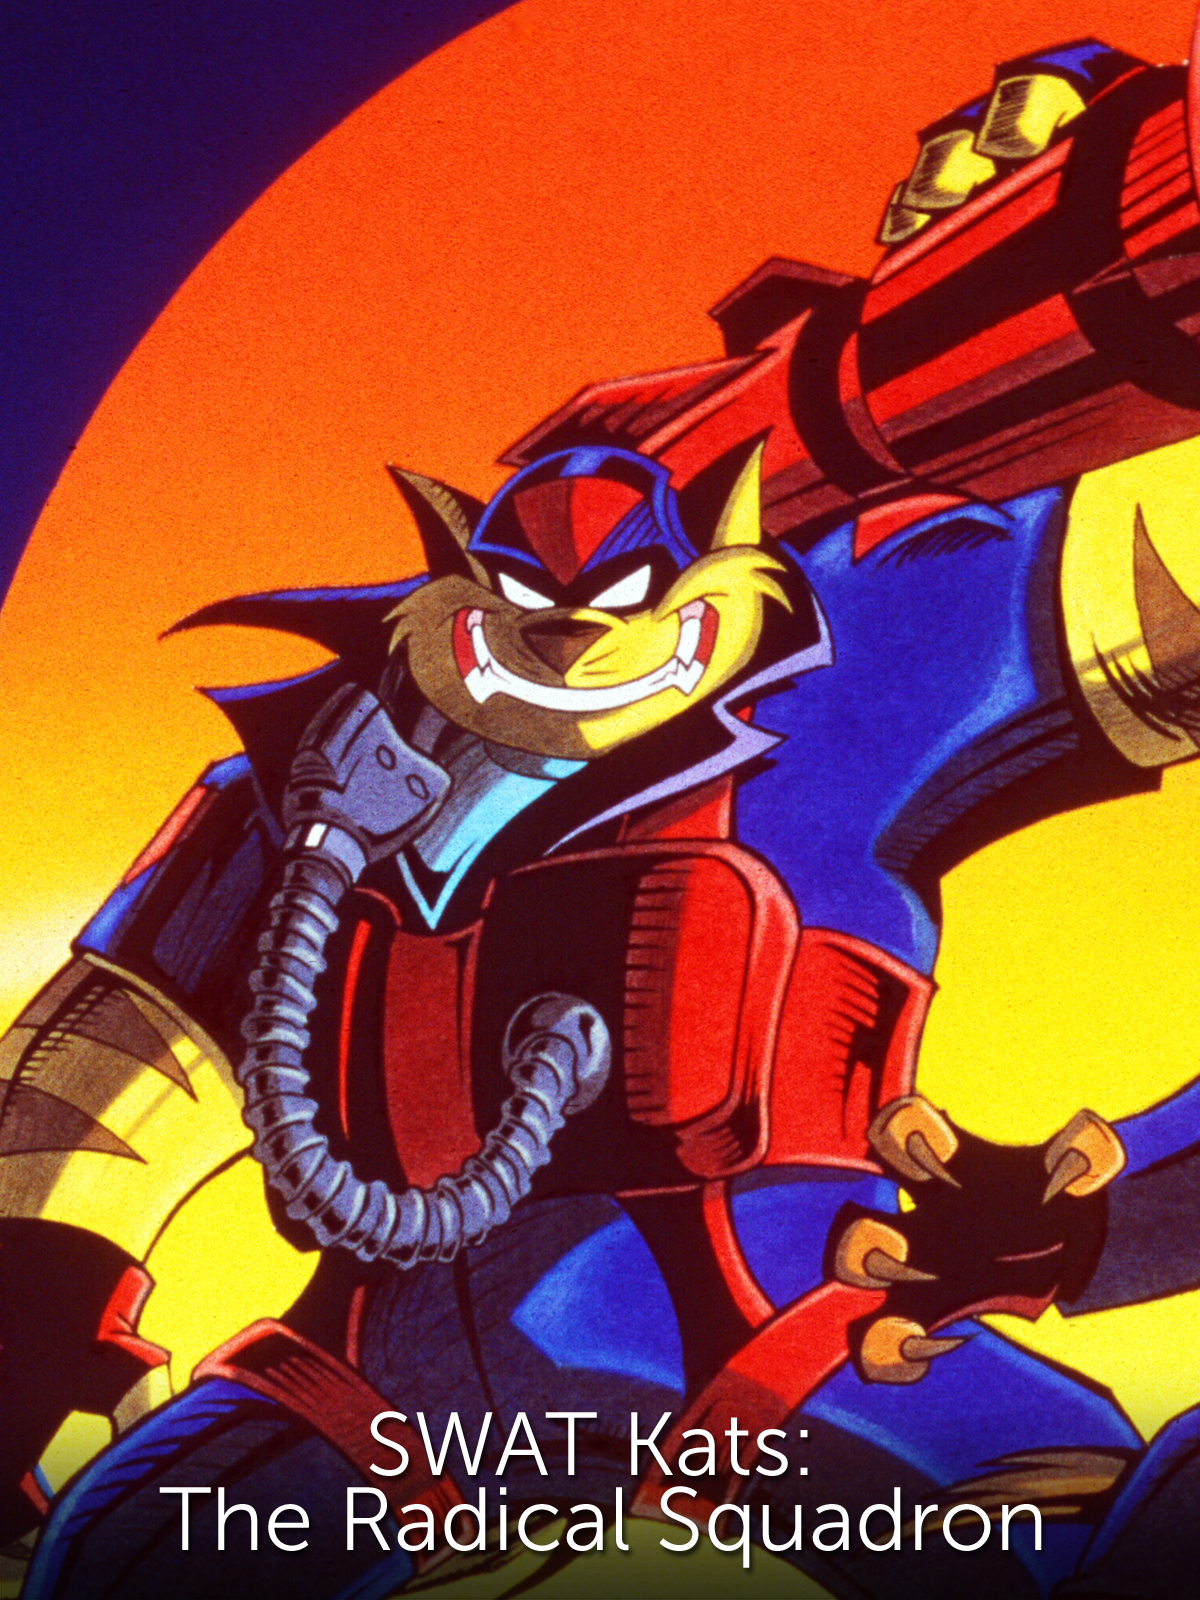 SWAT Kats: The Radical Squadron - Where to Watch and Stream - TV Guide